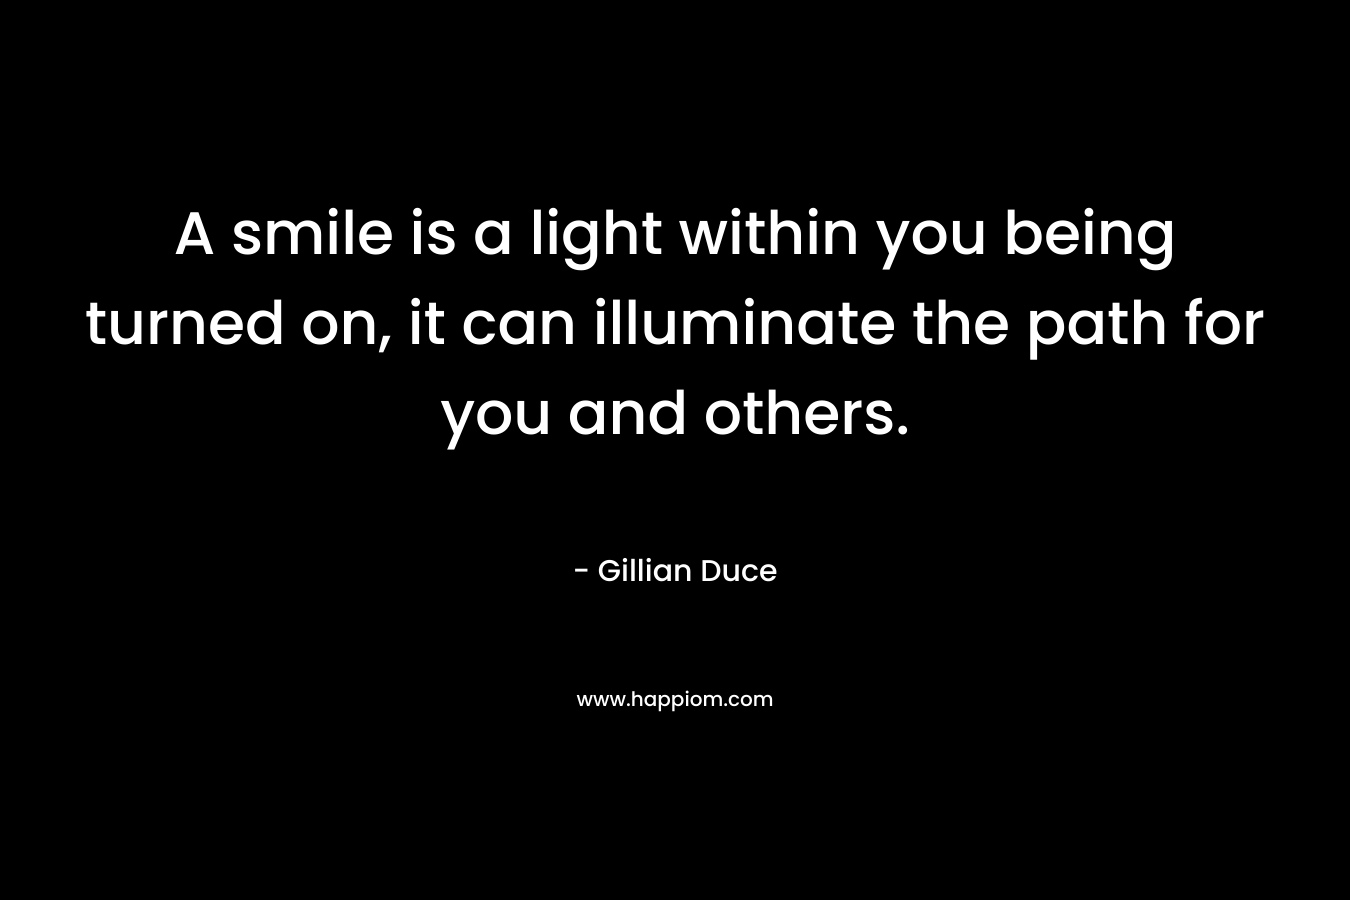 A smile is a light within you being turned on, it can illuminate the path for you and others.